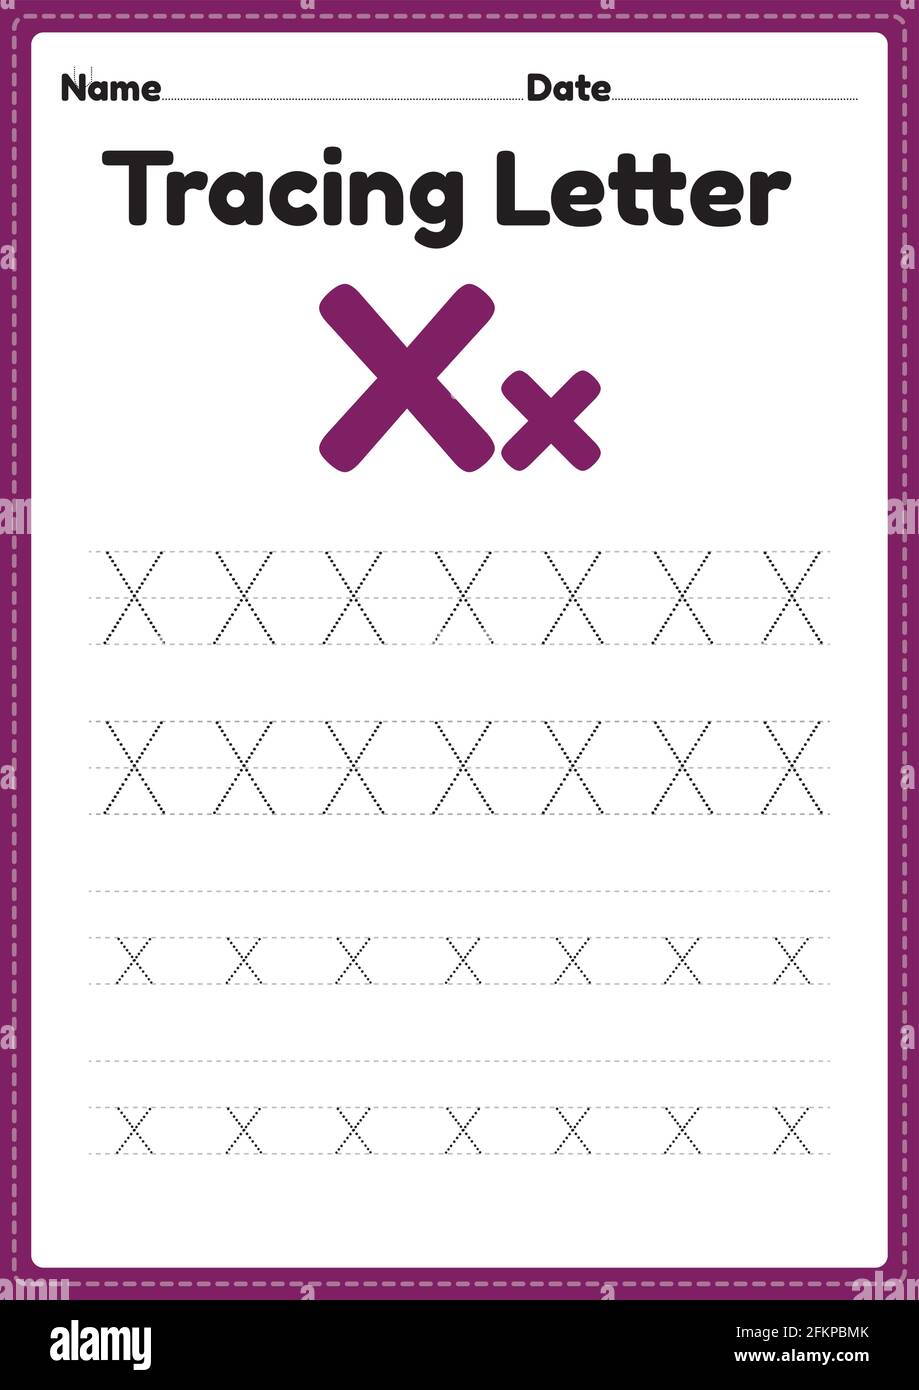 tracing letter x alphabet worksheet for kindergarten and preschool kids for handwriting practice and educational activities in a printable page illust stock vector image art alamy